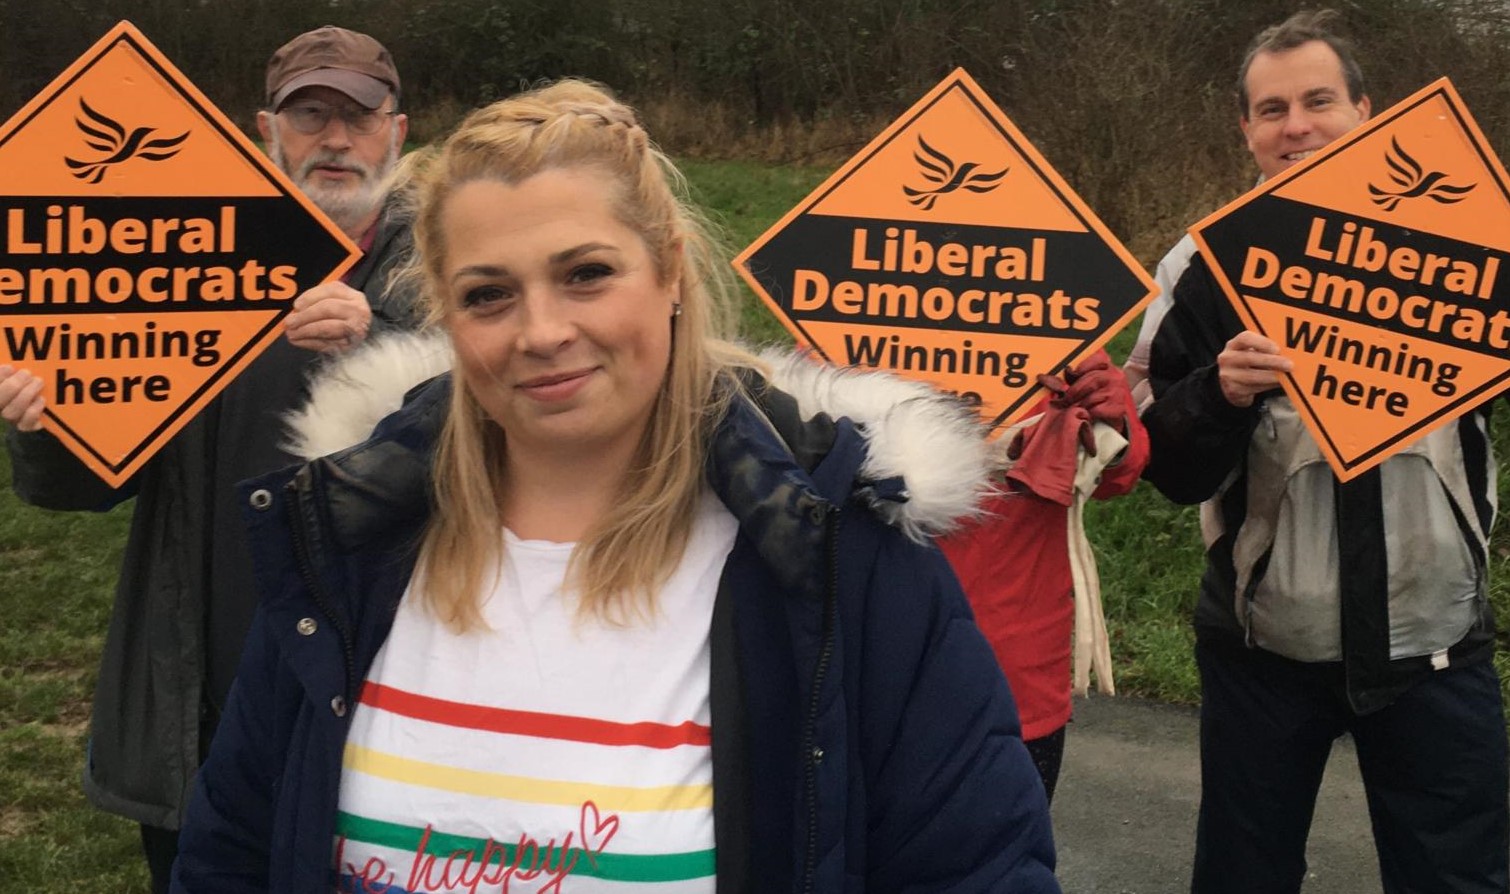 Lib Dems claim “shock victory” over Tories in Carterton by-election